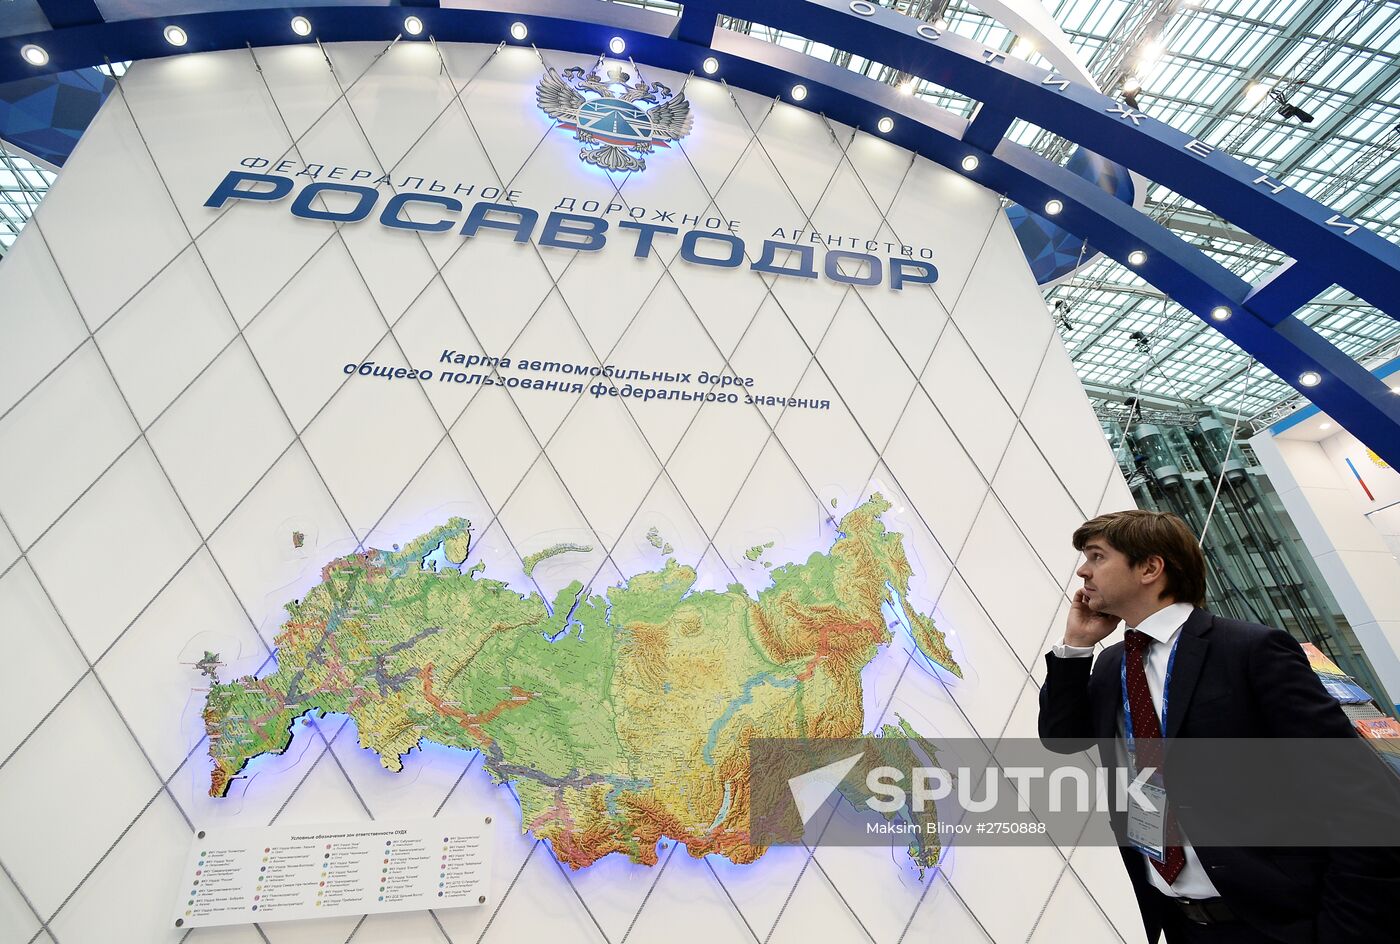 Transport of Russia 9th International Exhibition